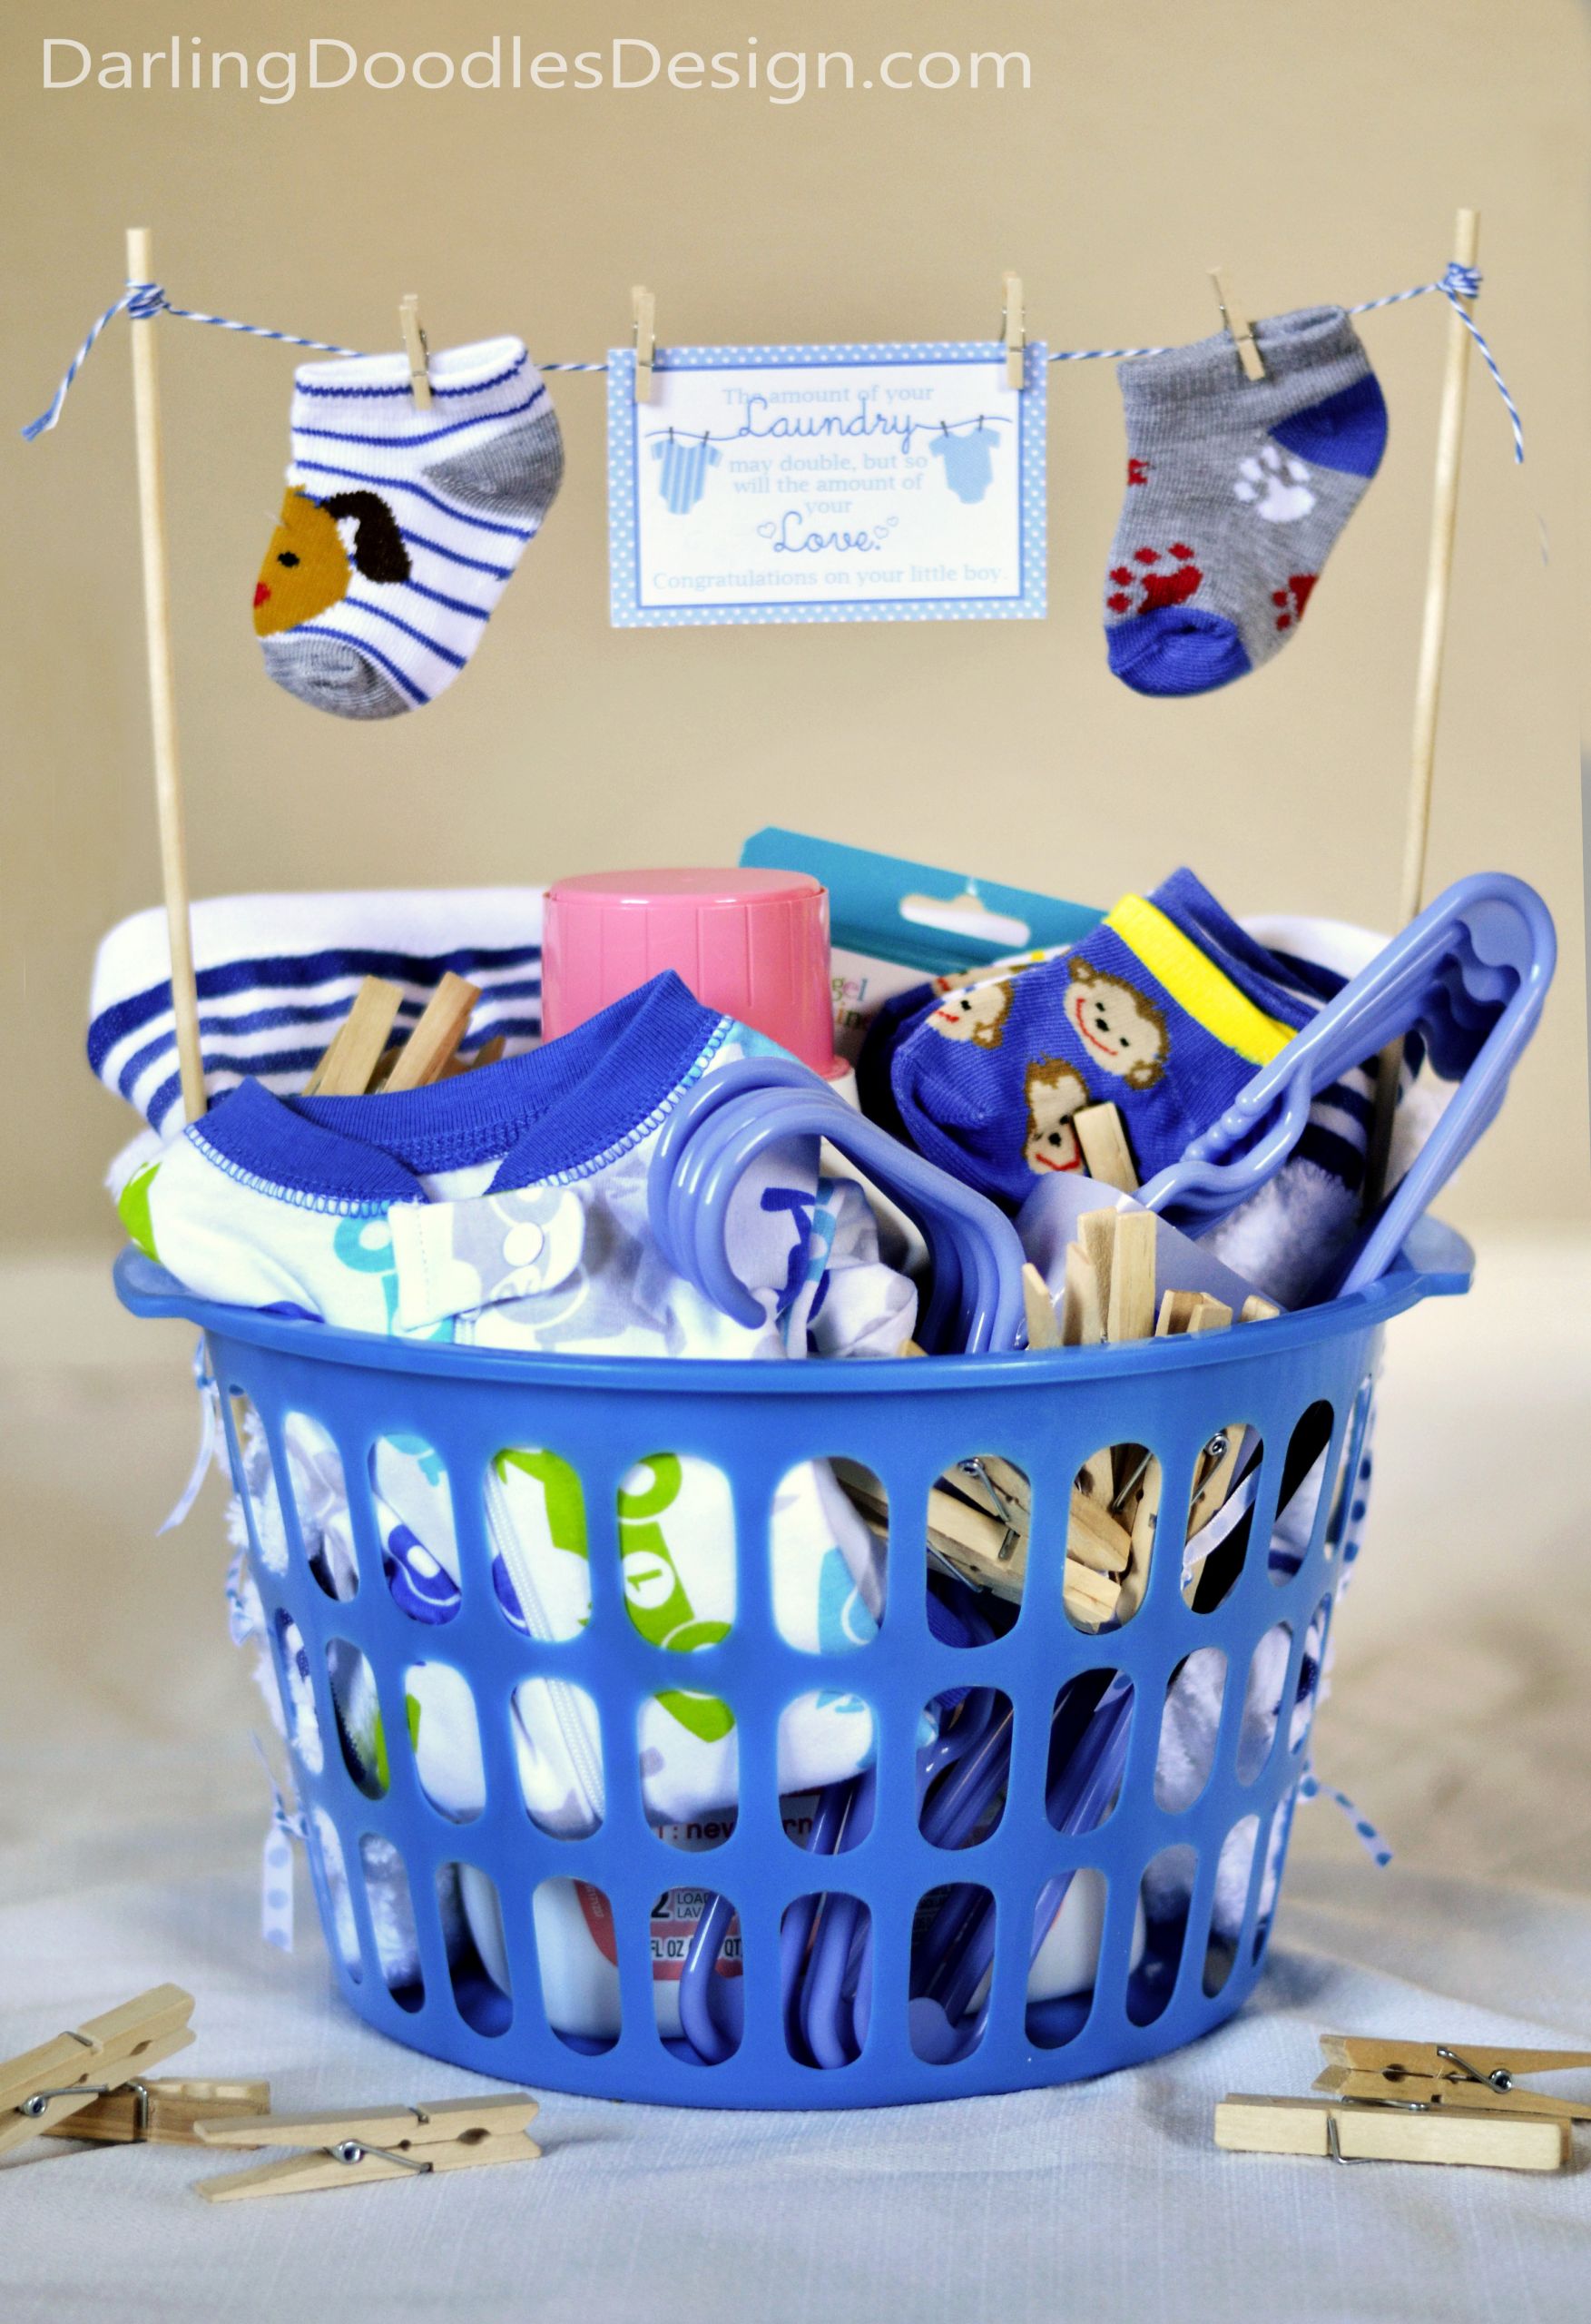 DIY Baby Boy Gift
 Loads of Love and Laundry Darling Doodles